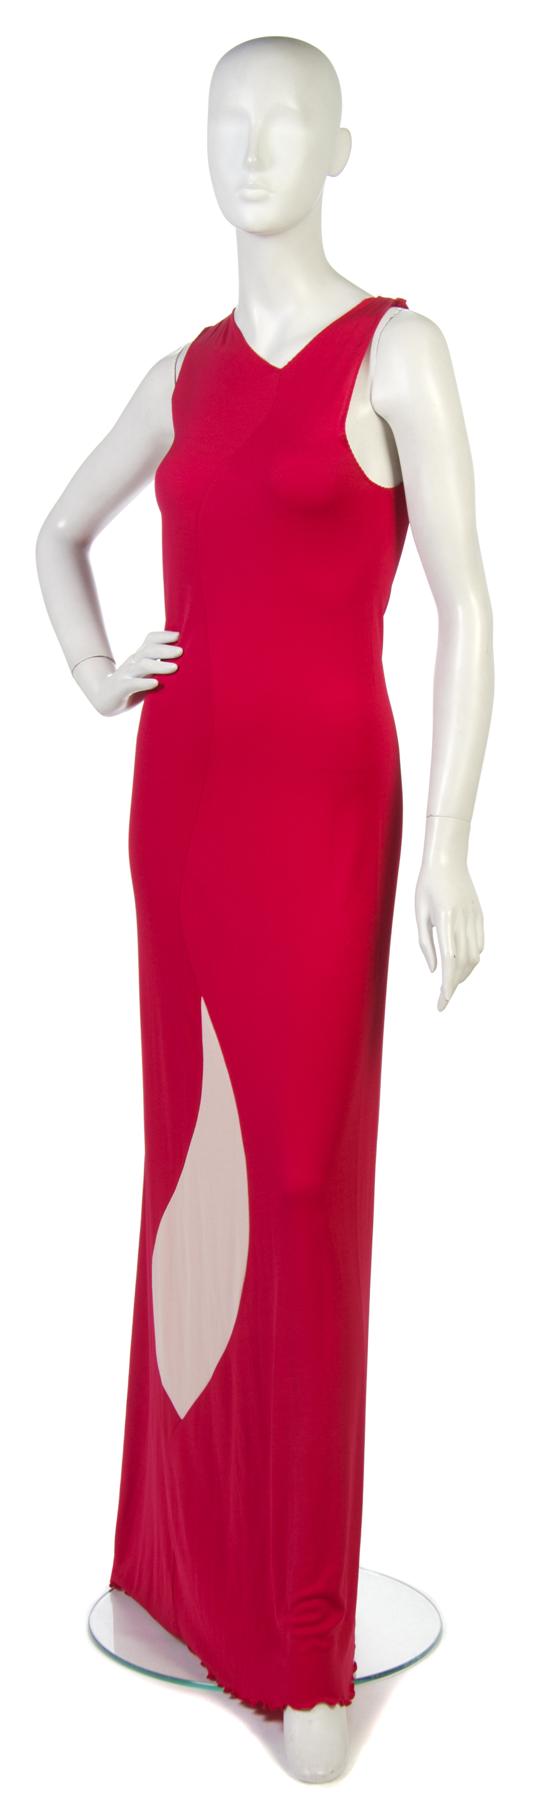 A Stephen Burrows Red Jersey Dress 152028